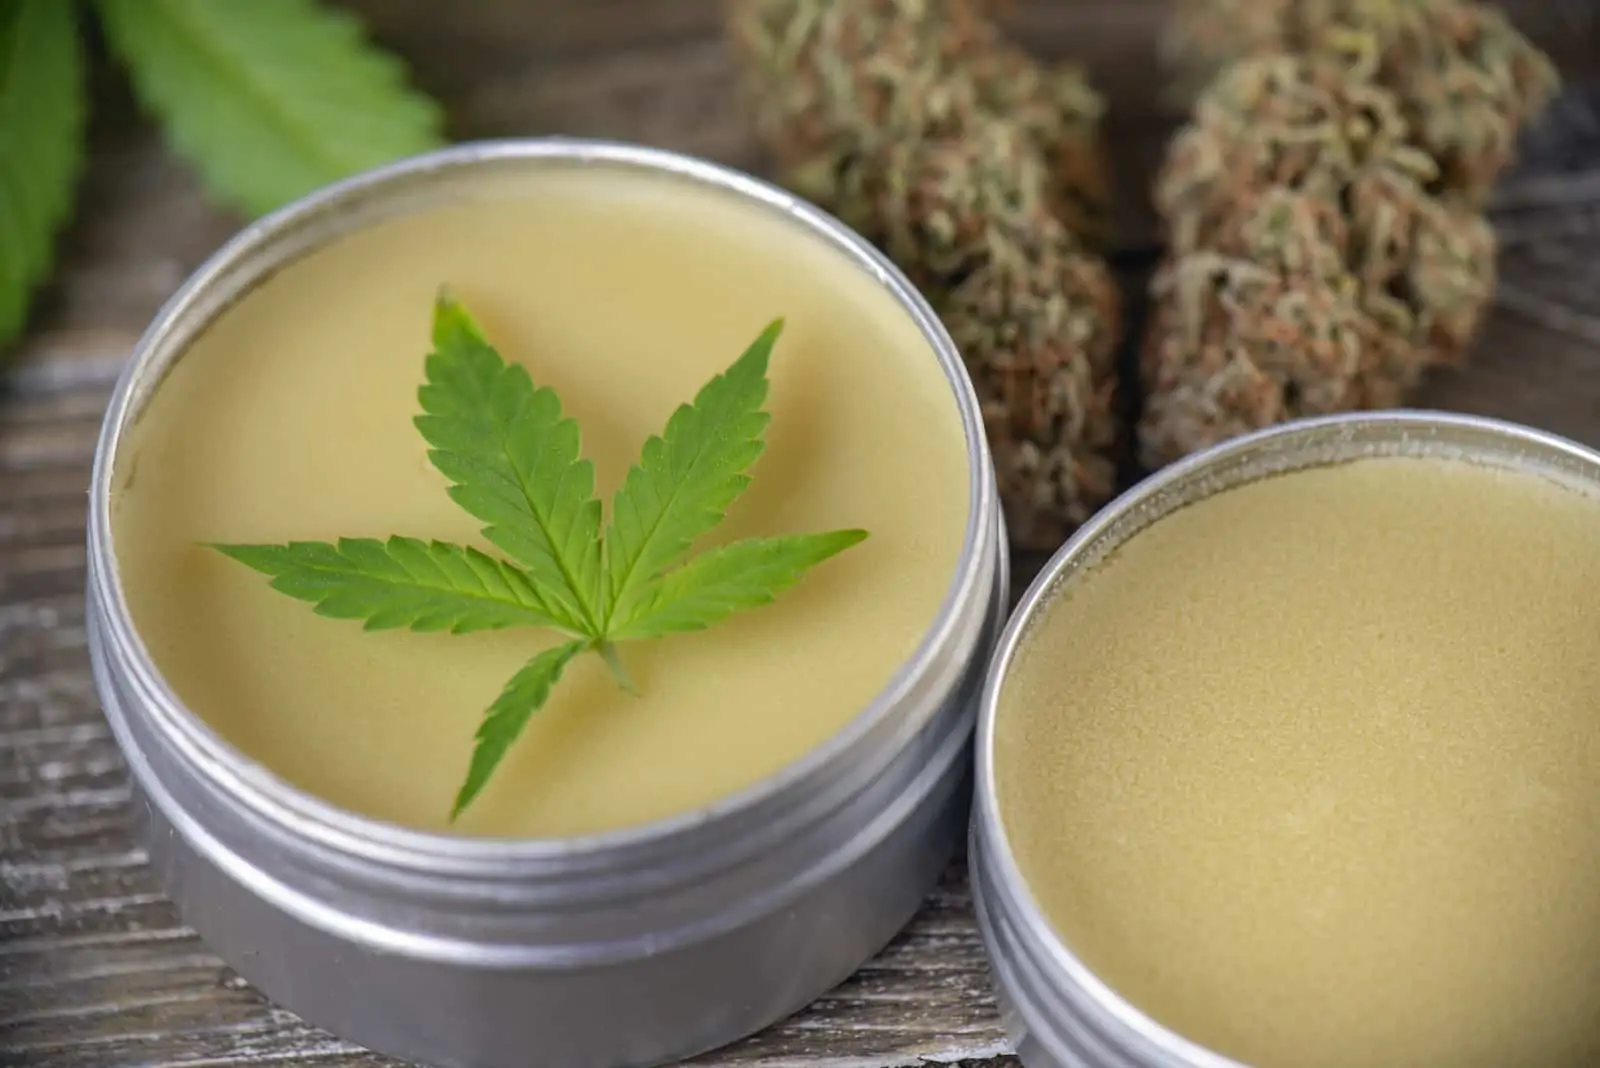 Tips On Creating Cannabis Topical Products